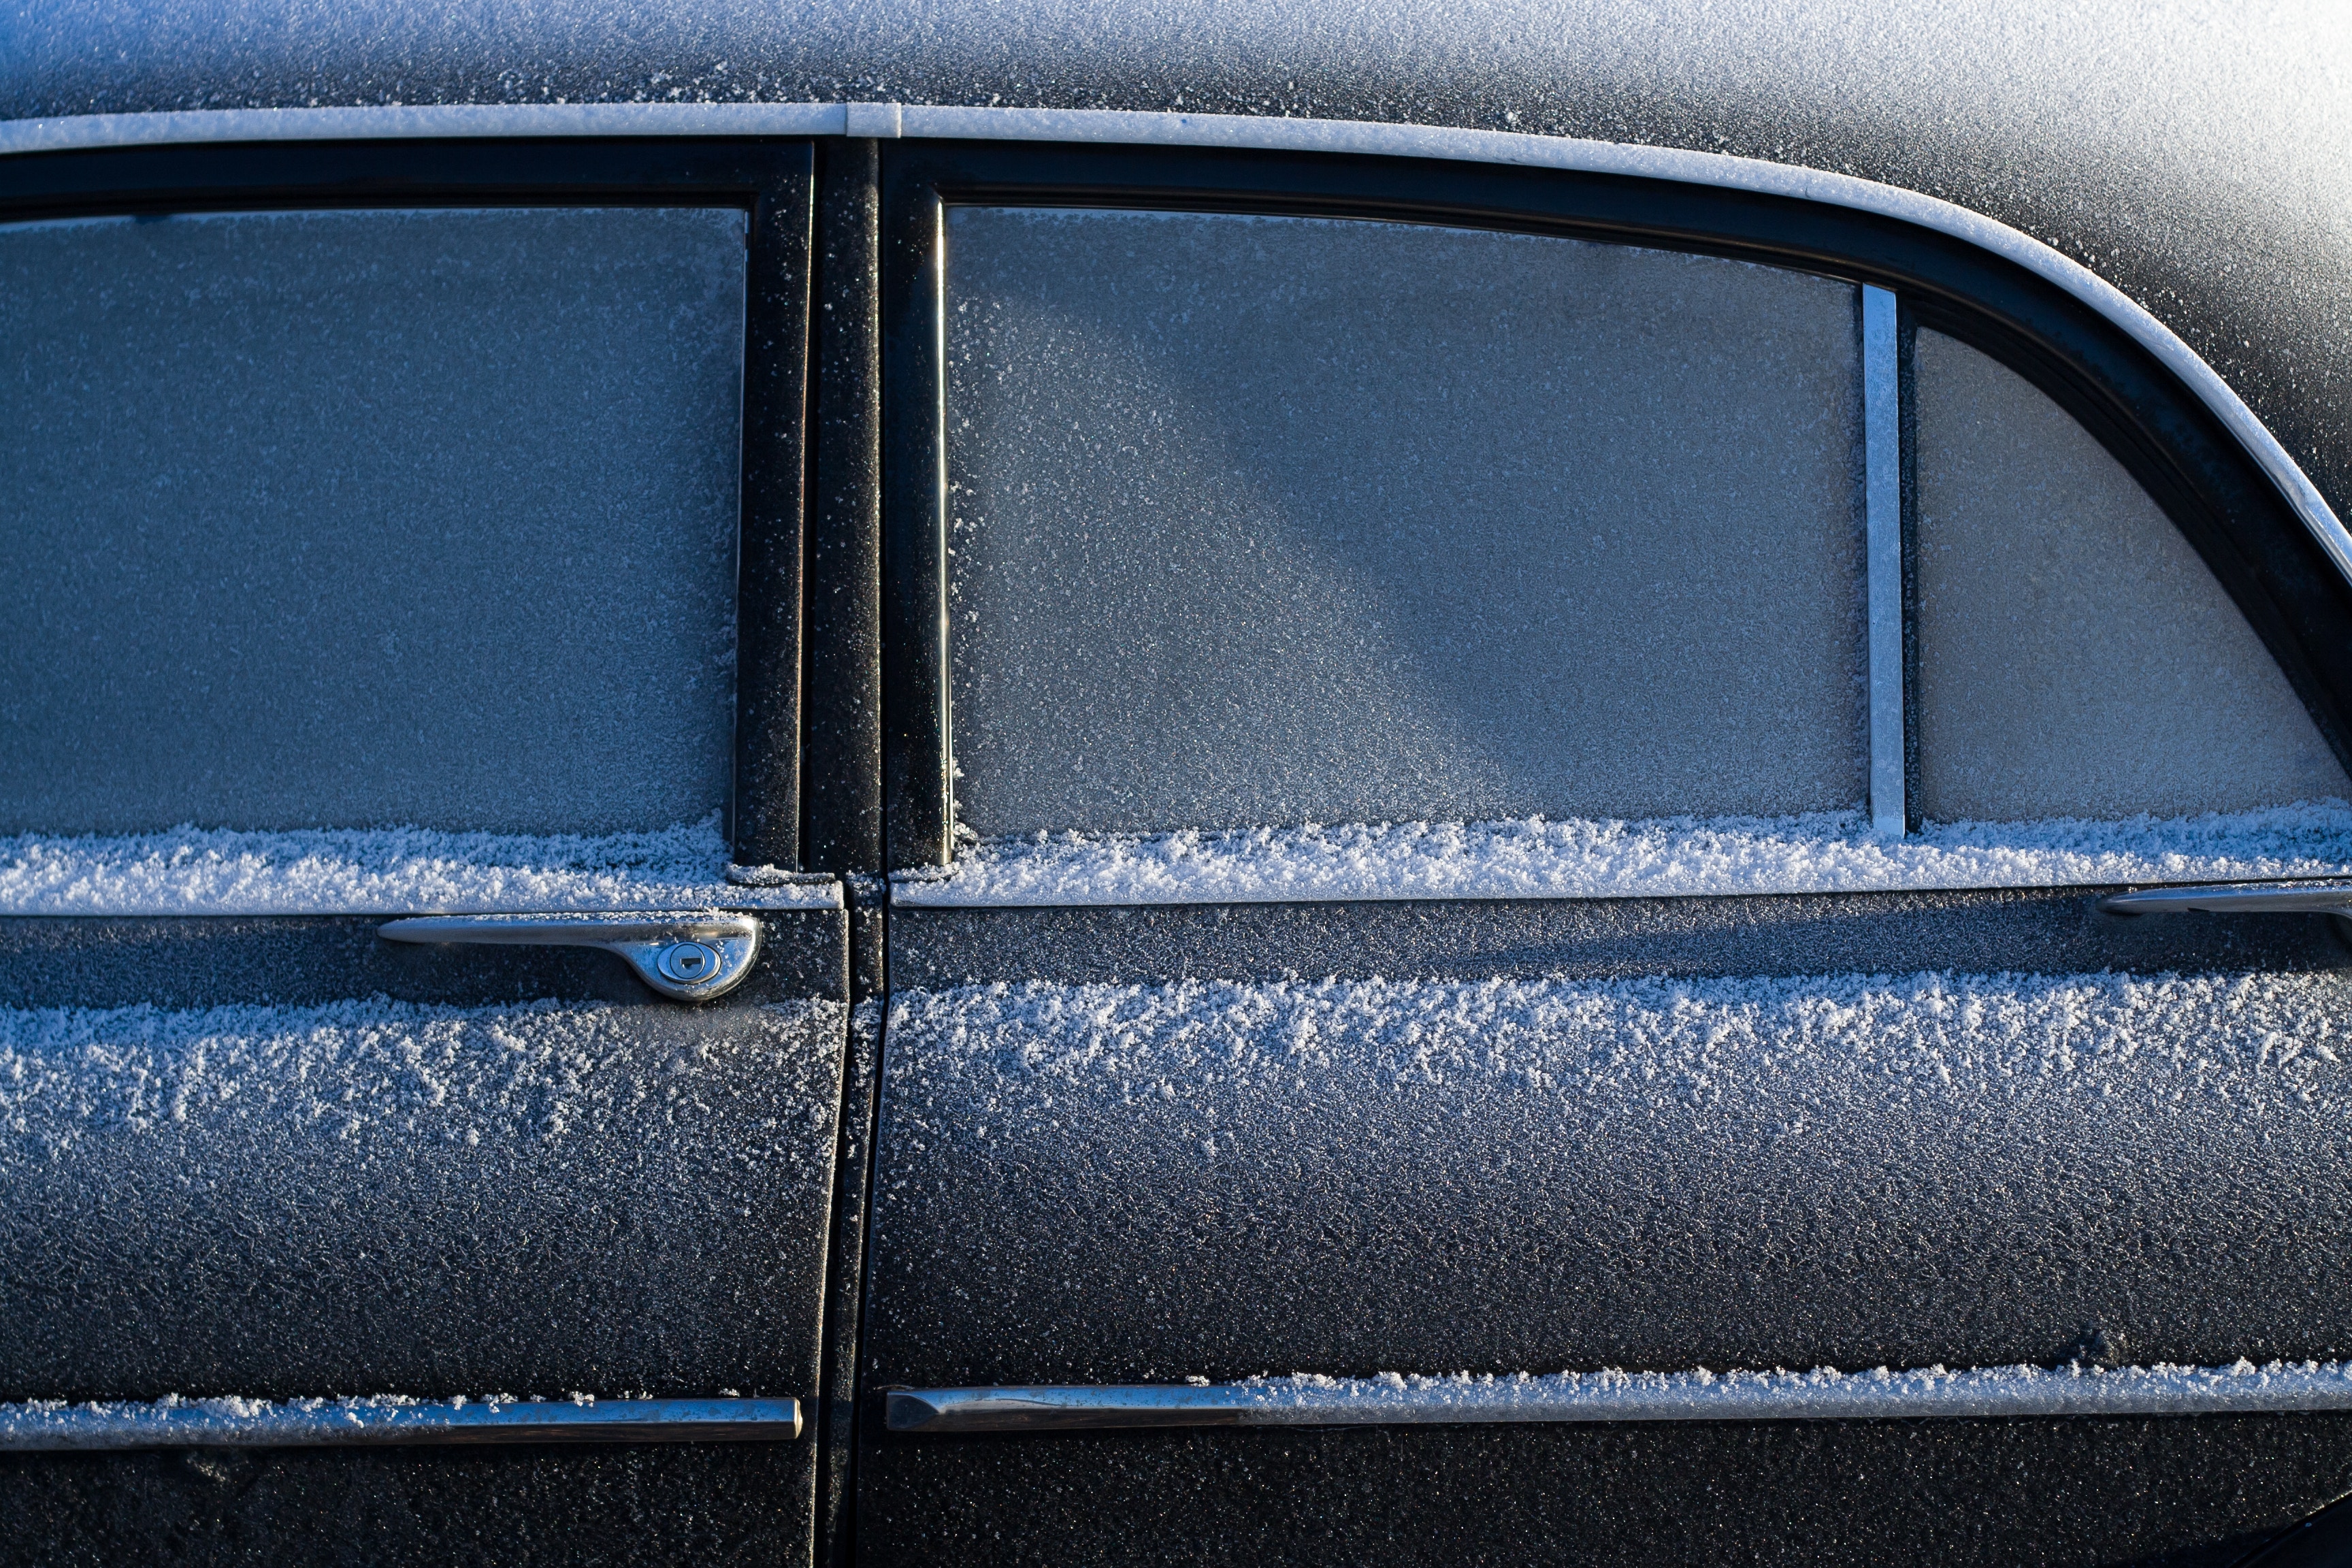 How Does Cold Weather Affect Your Car?